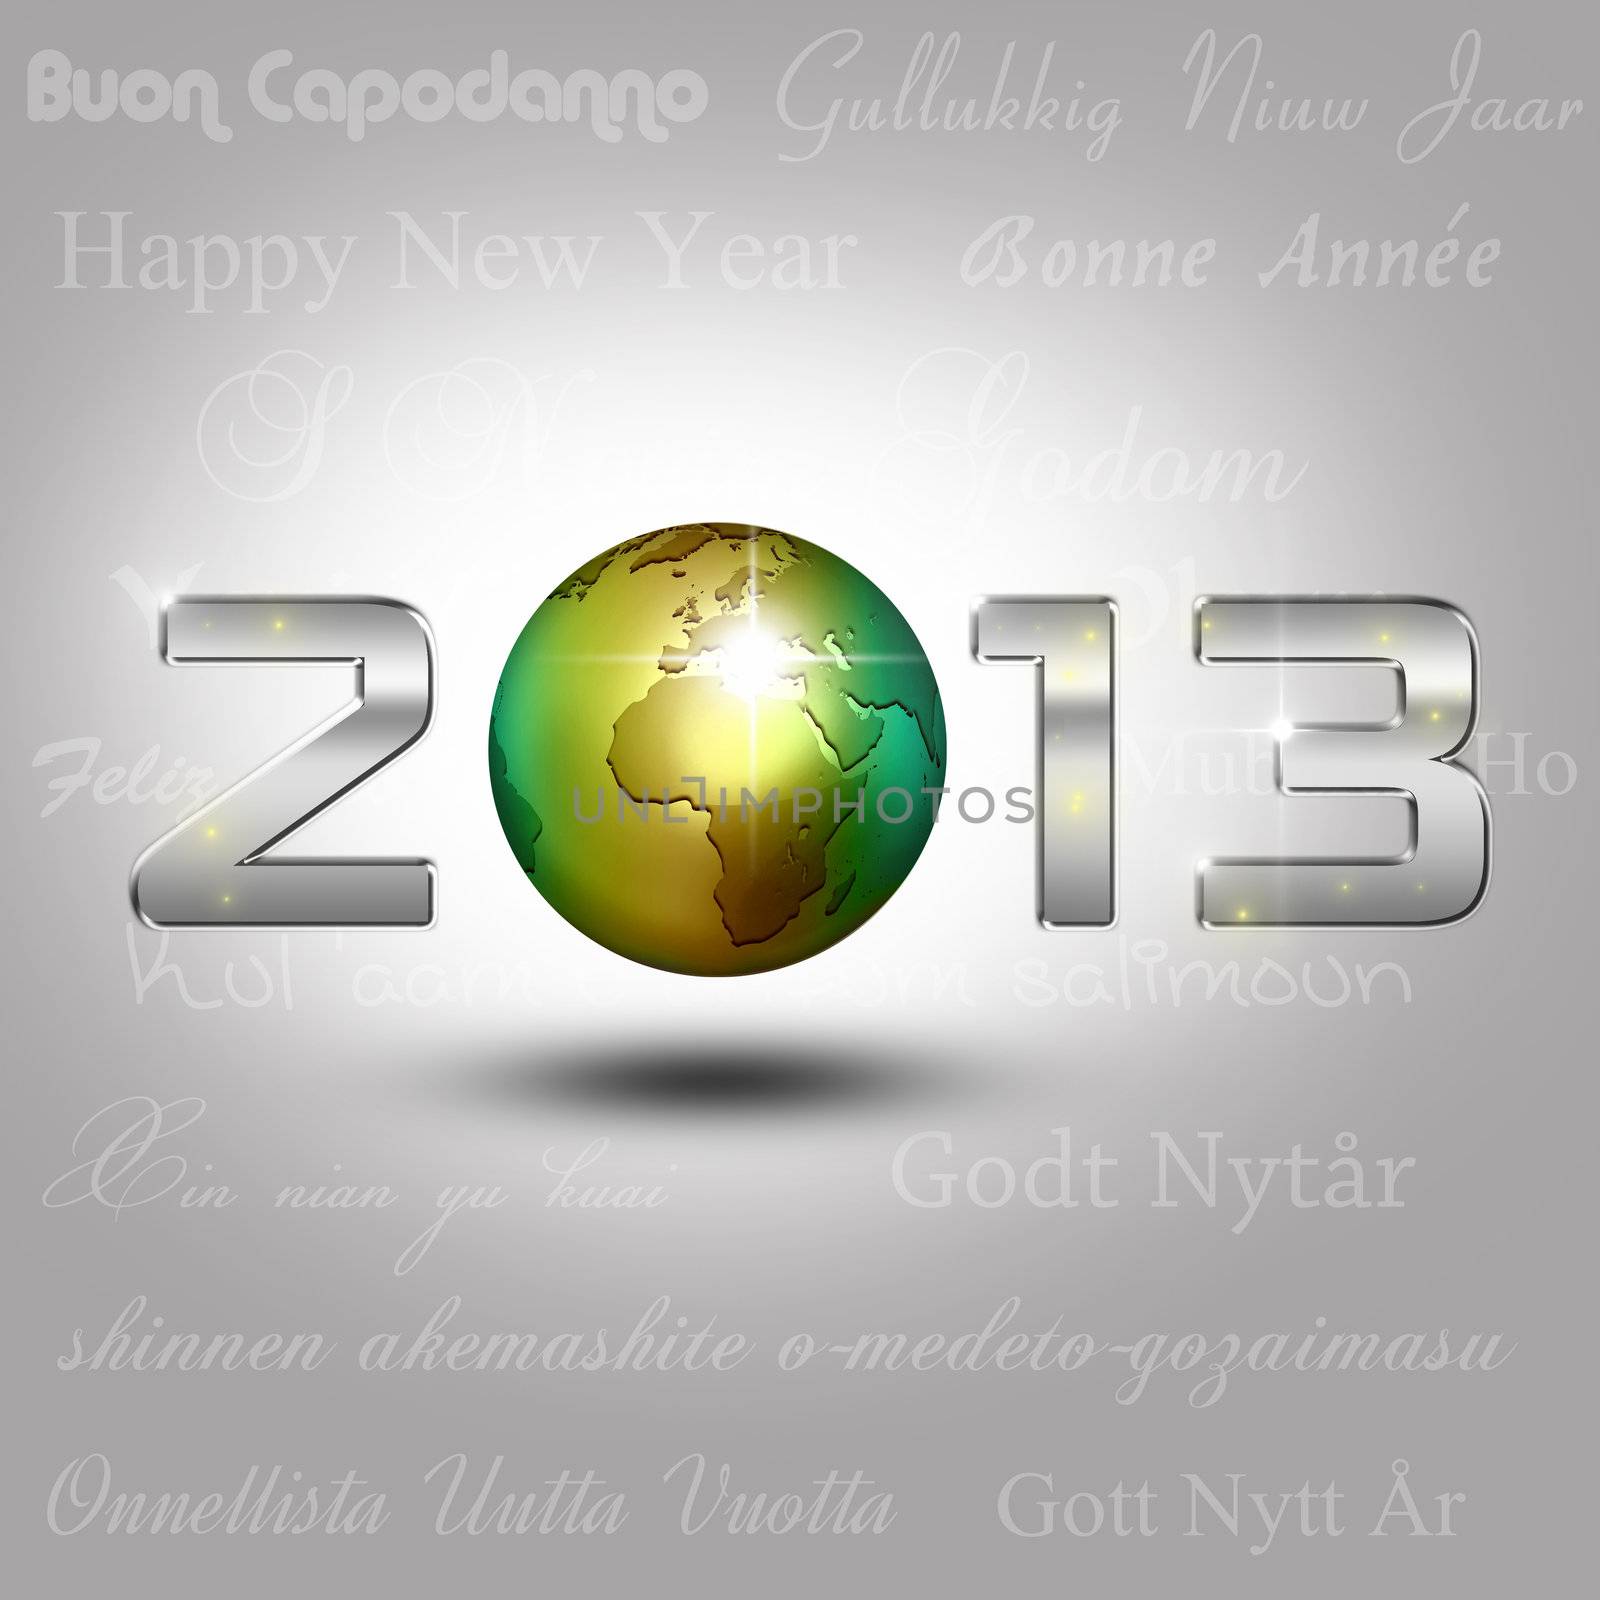 New Year Illustration: A golden globe with shiny silver number 2013 on a light grey background with New Year greetings in different languages.